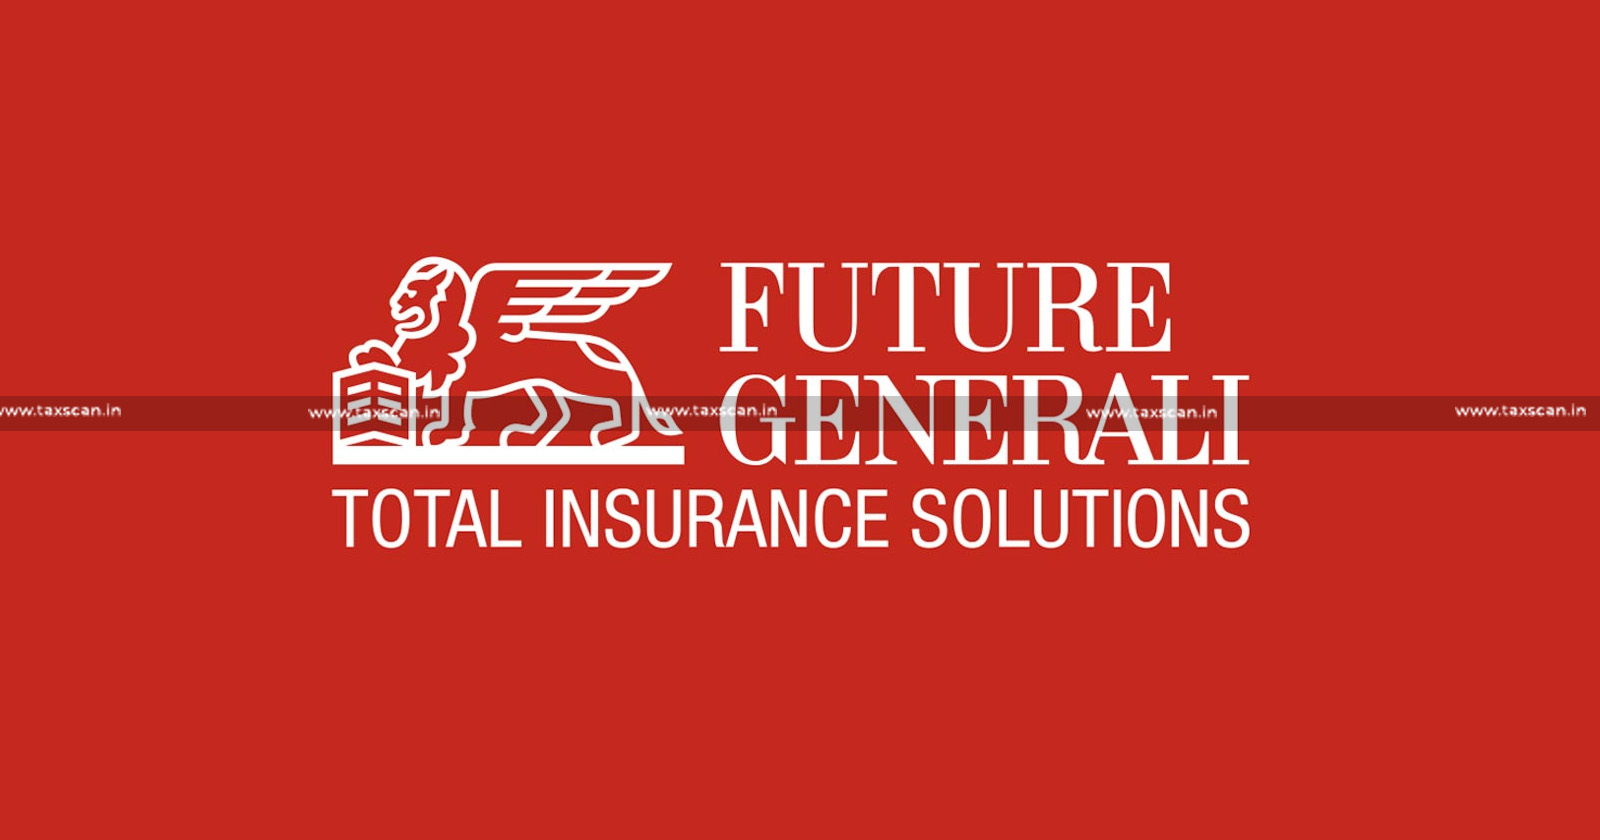 Future Generali India Life Insurance - ITAT - Deletion of Income Tax Addition on Profits from Pension Funds - Deletion of Income Tax Addition -Pension Funds - Profits from Pension Funds- taxscan